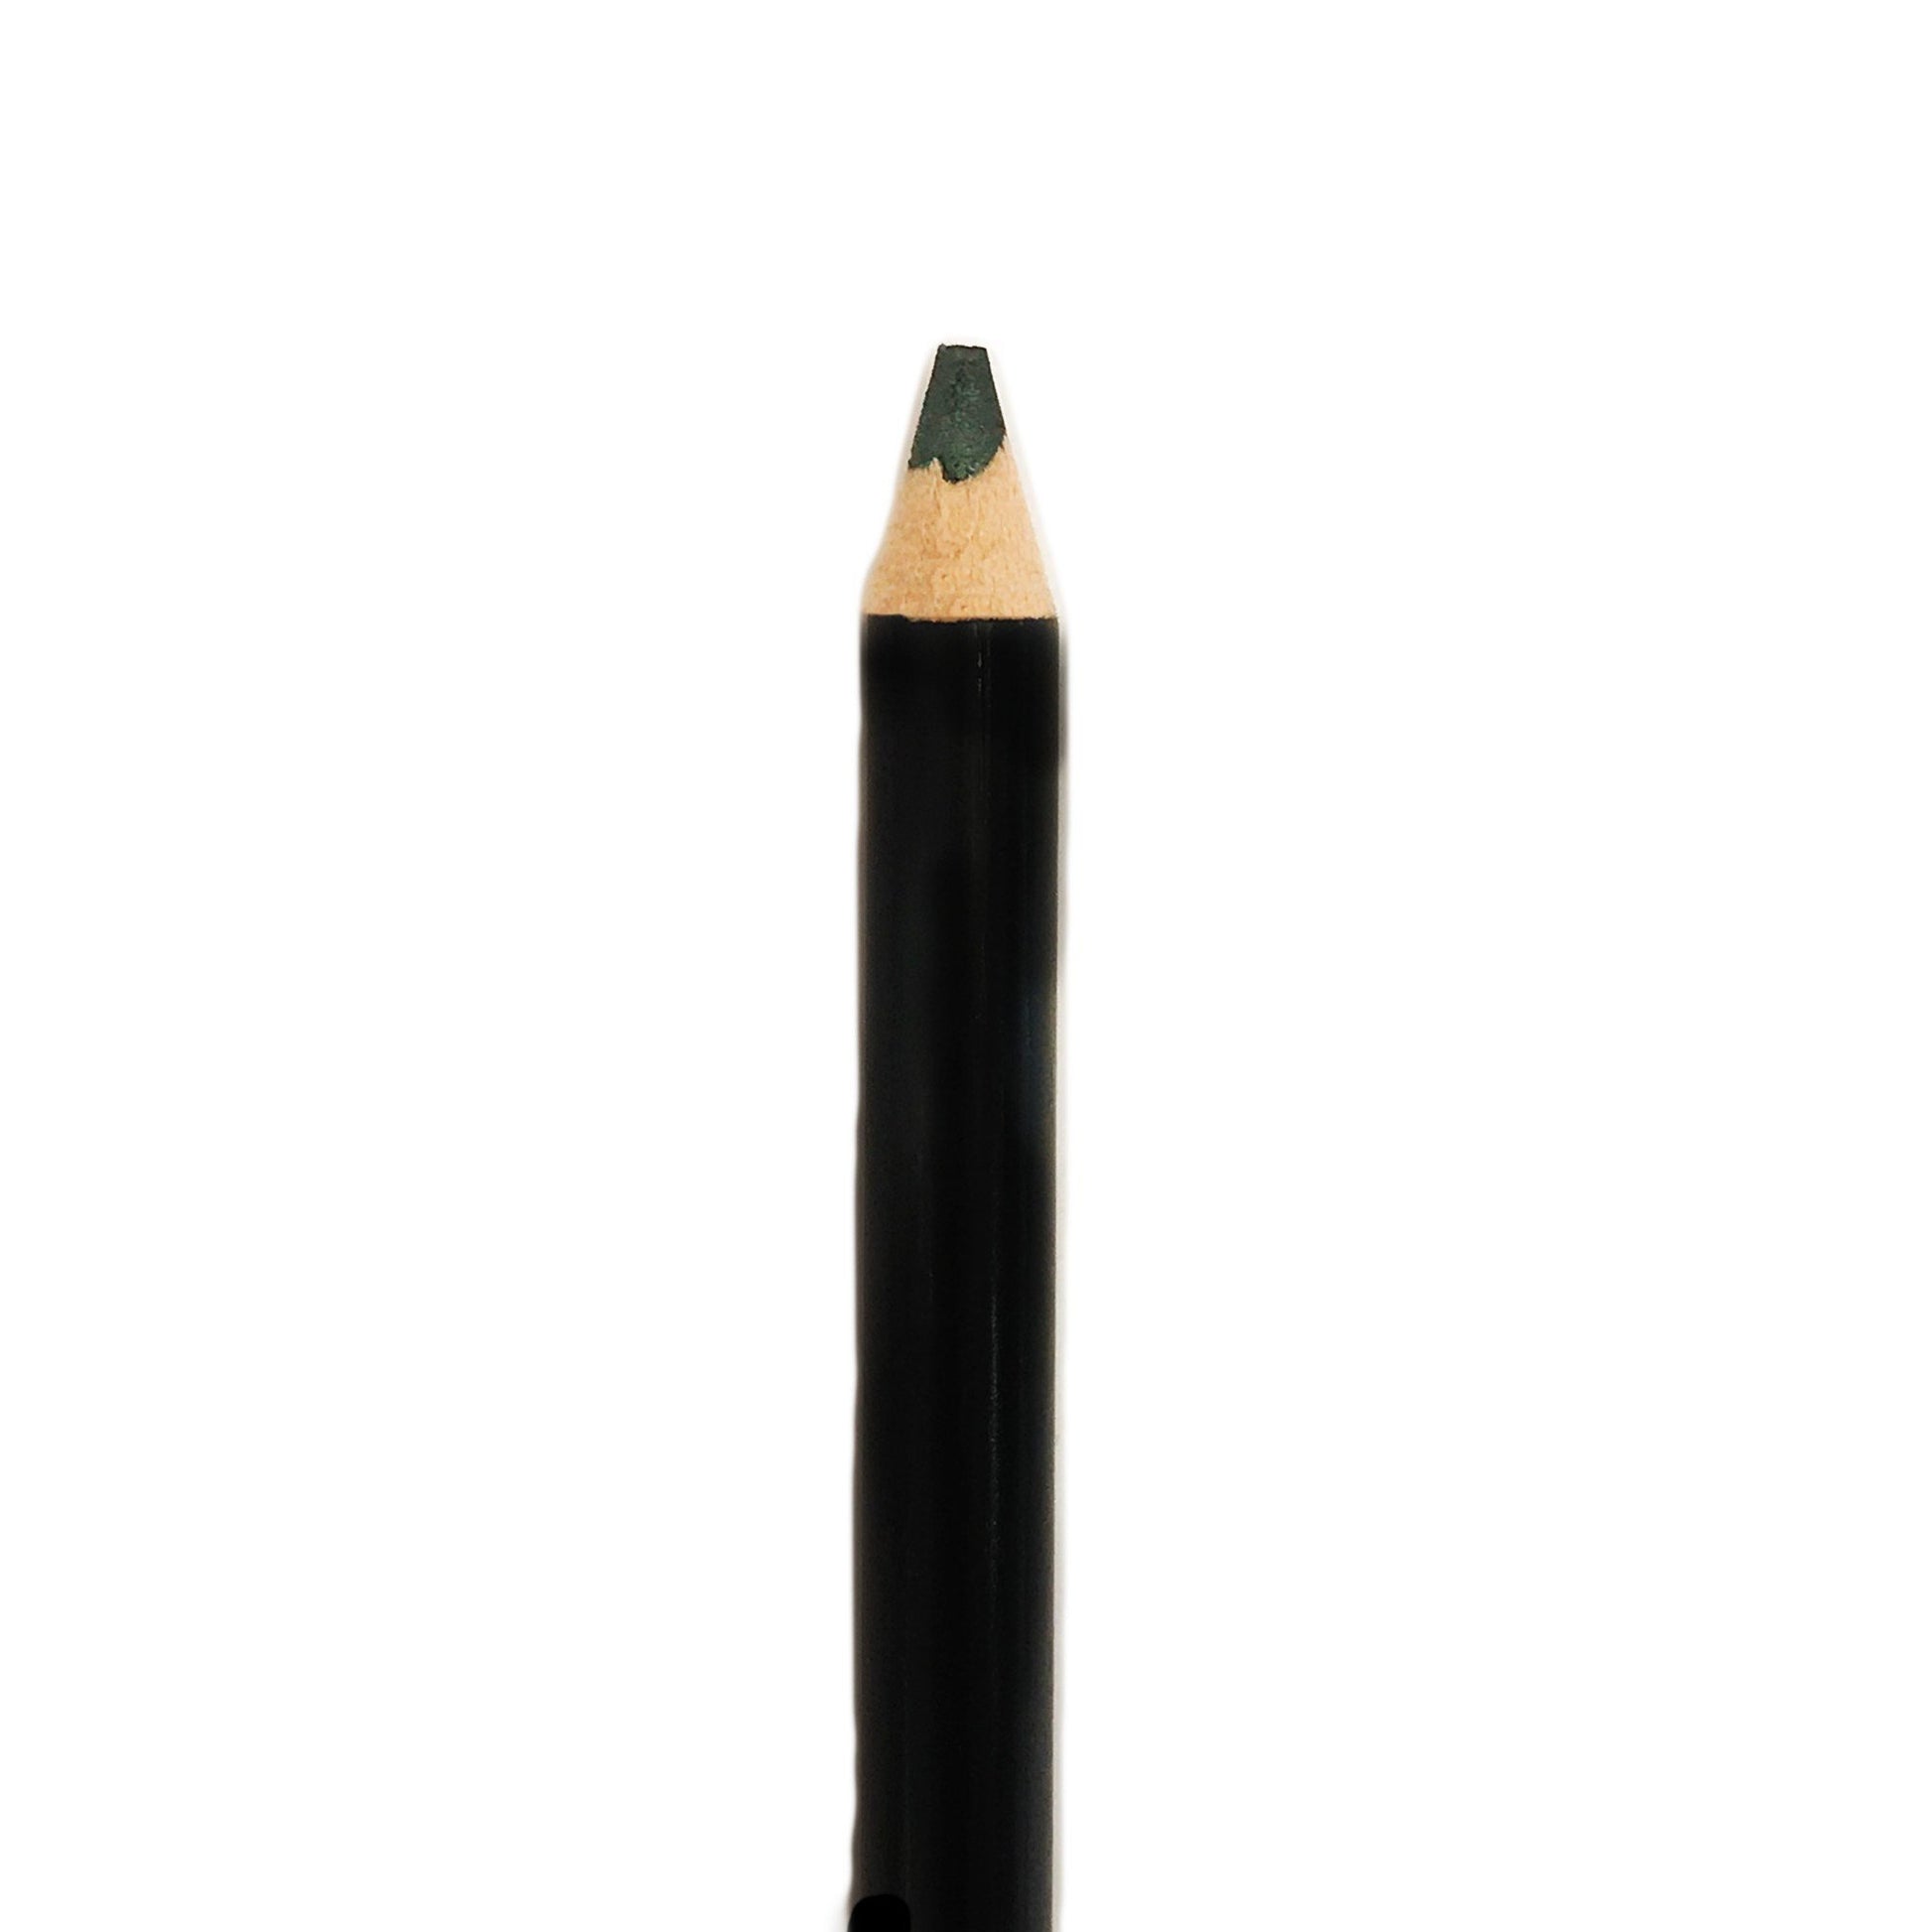 Moss Pencil Eye Makeup ready for your name by Indigo Private Label Cosmetics